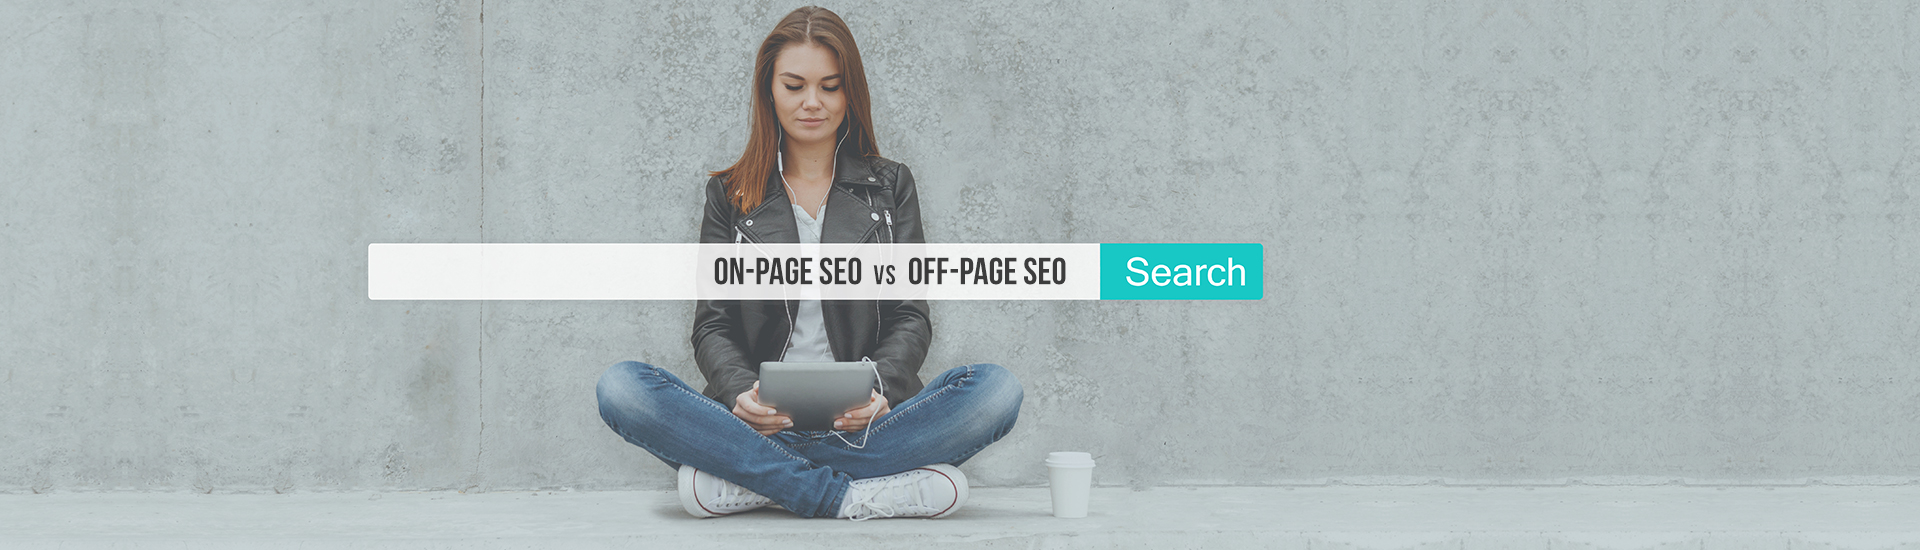 On Page SEO Vs Off Page SEO